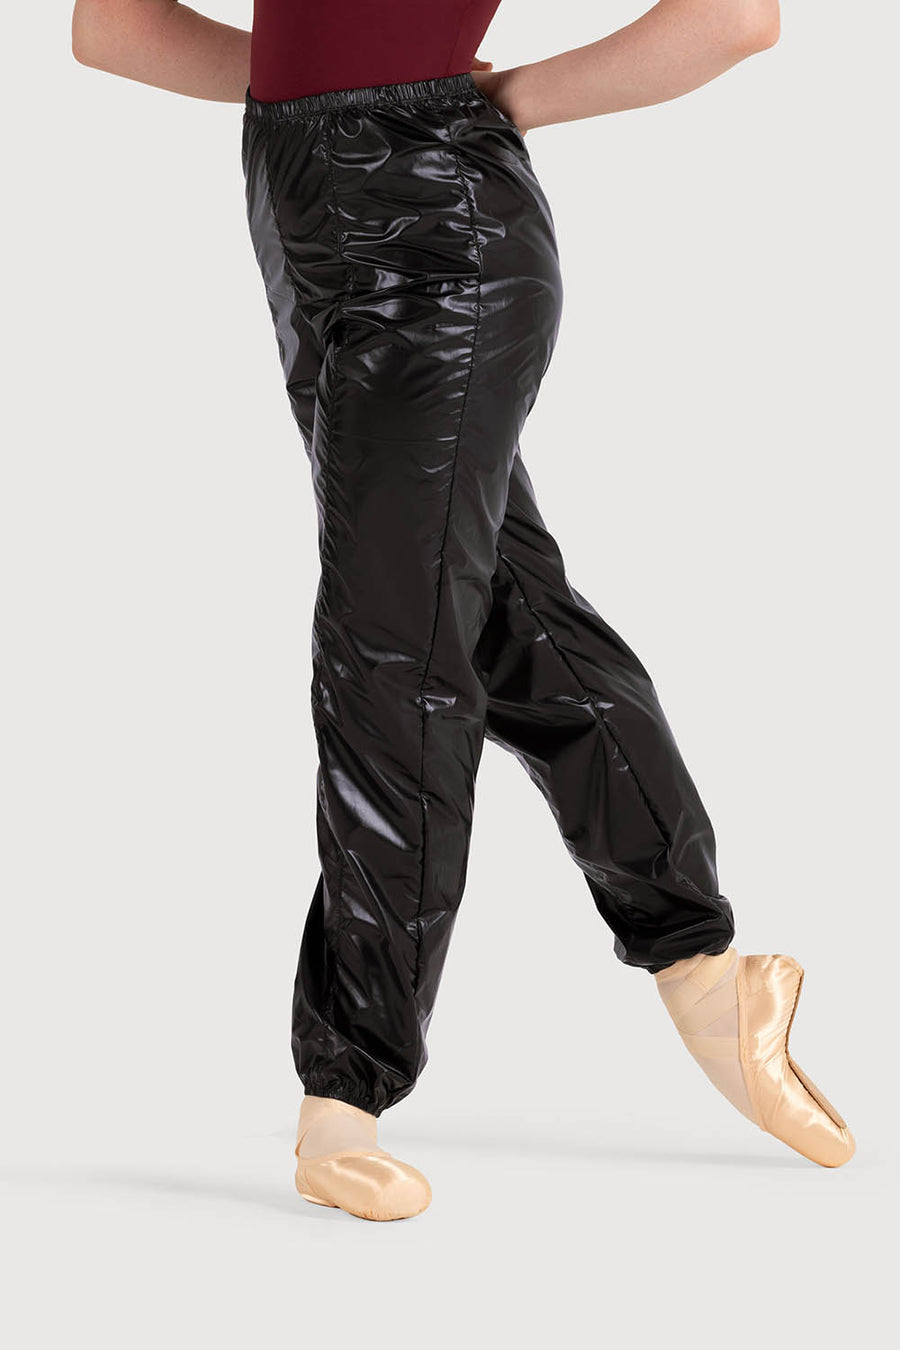 Adult Pearlescent Ripstop Pants